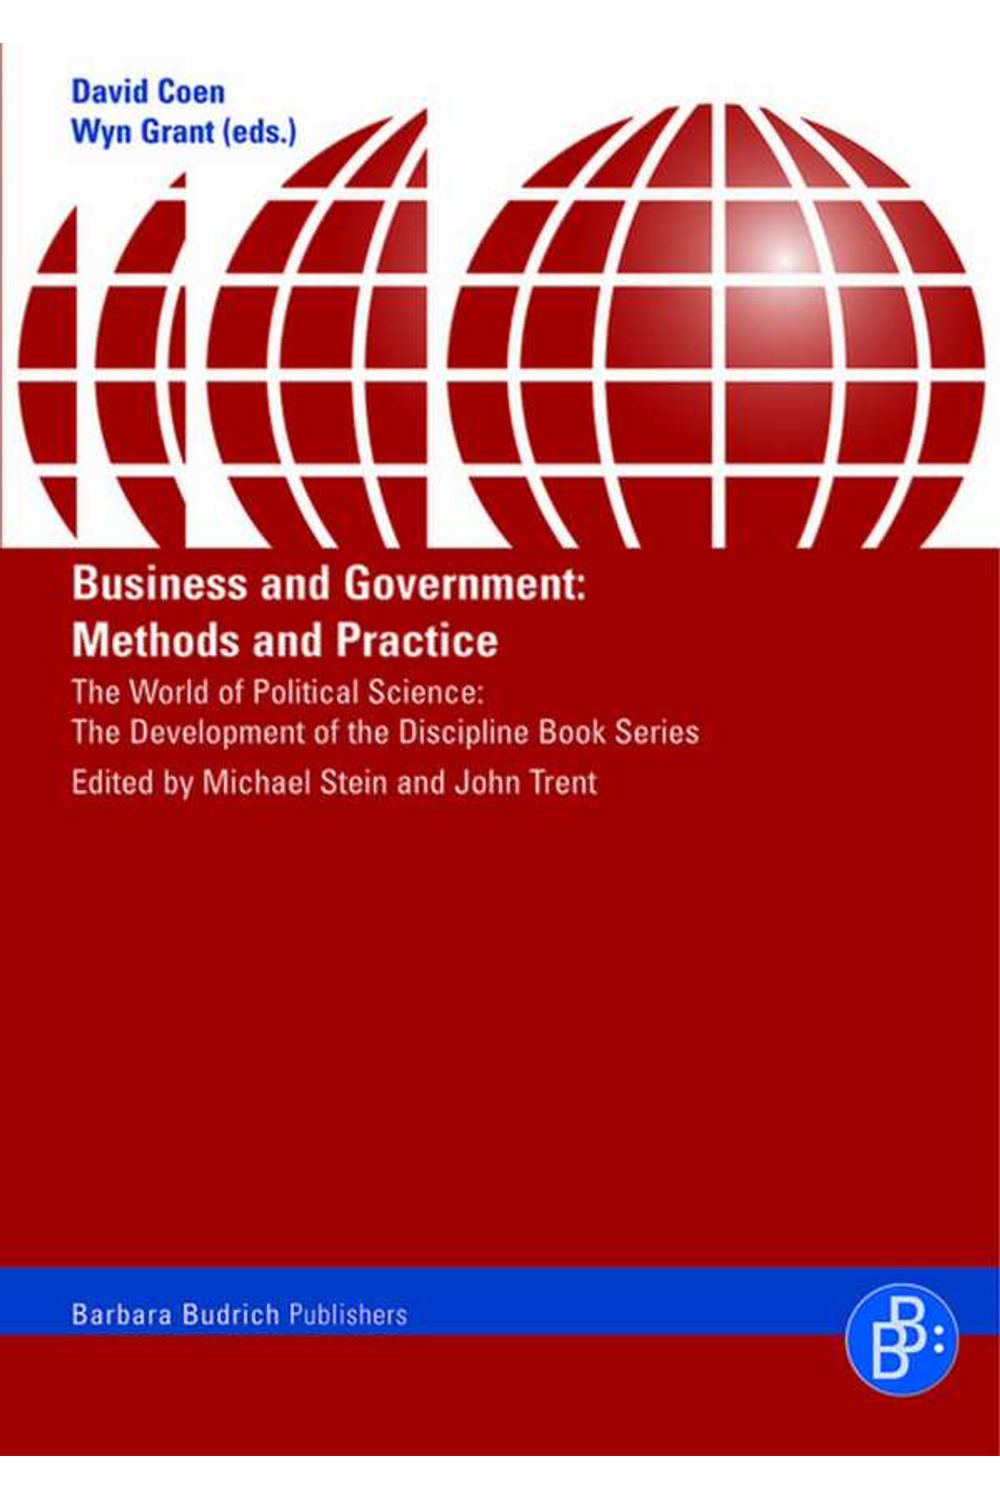 bw-business-and-government-verlag-barbara-budrich-9783847412984